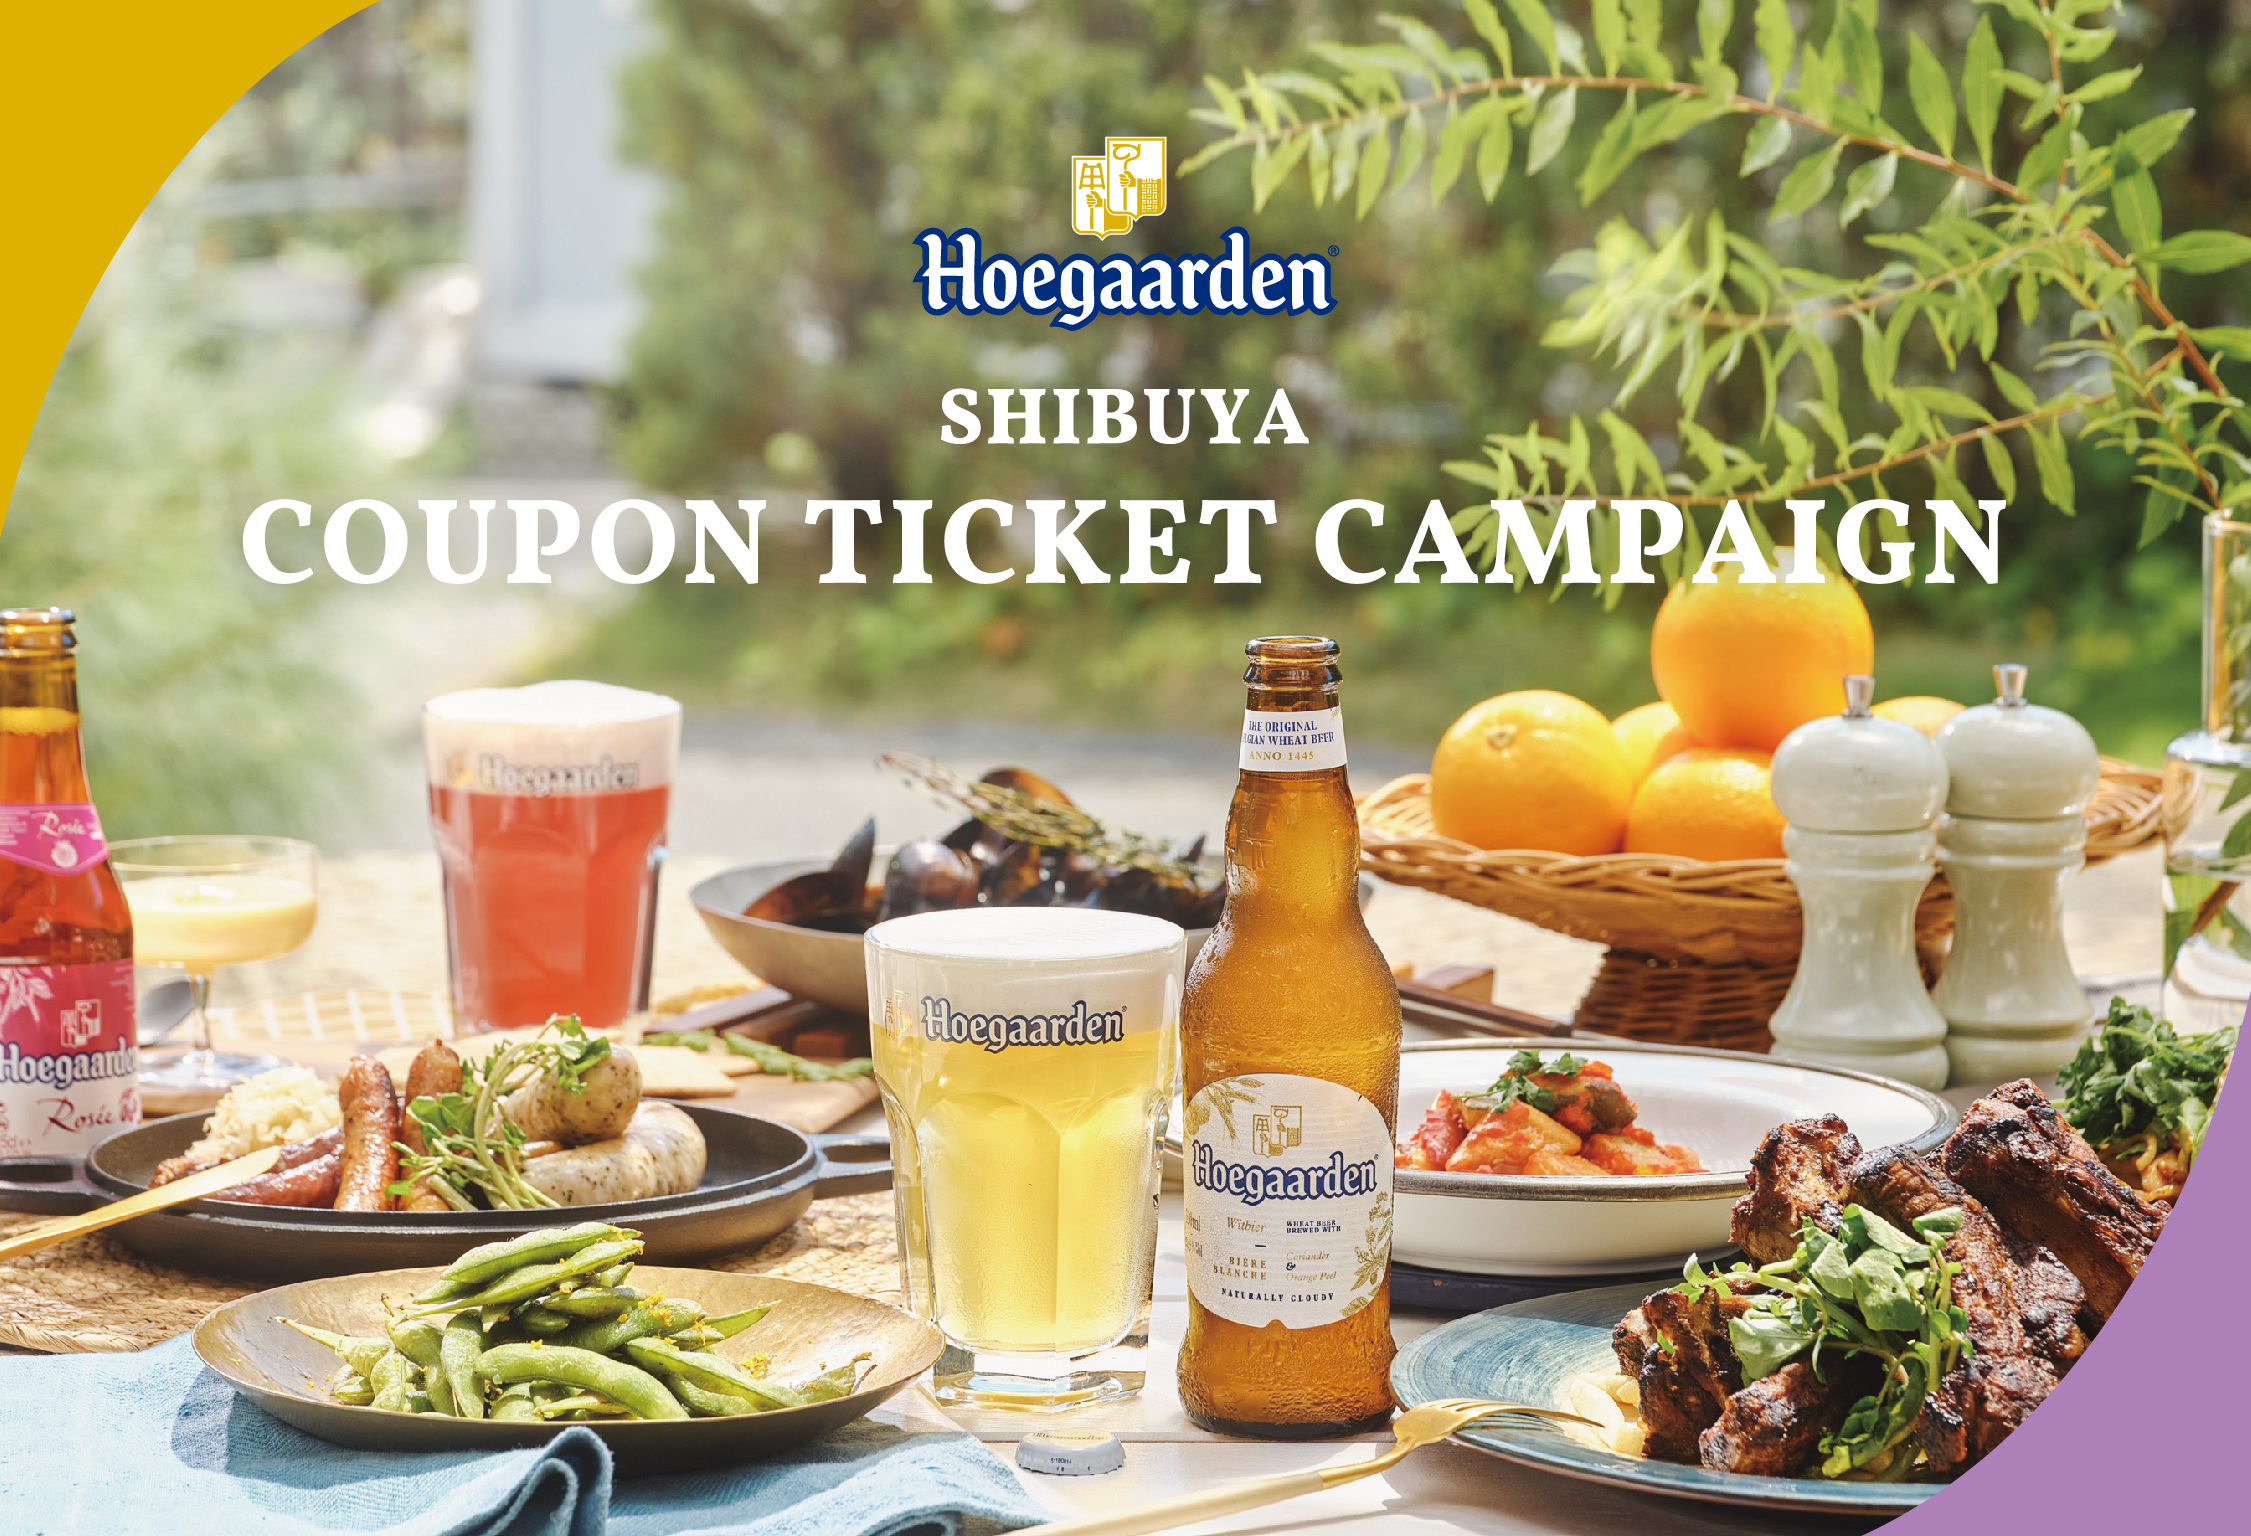 Hoegaarden（ヒューガルデン）SHIBUYA Coupon Ticket Campaign